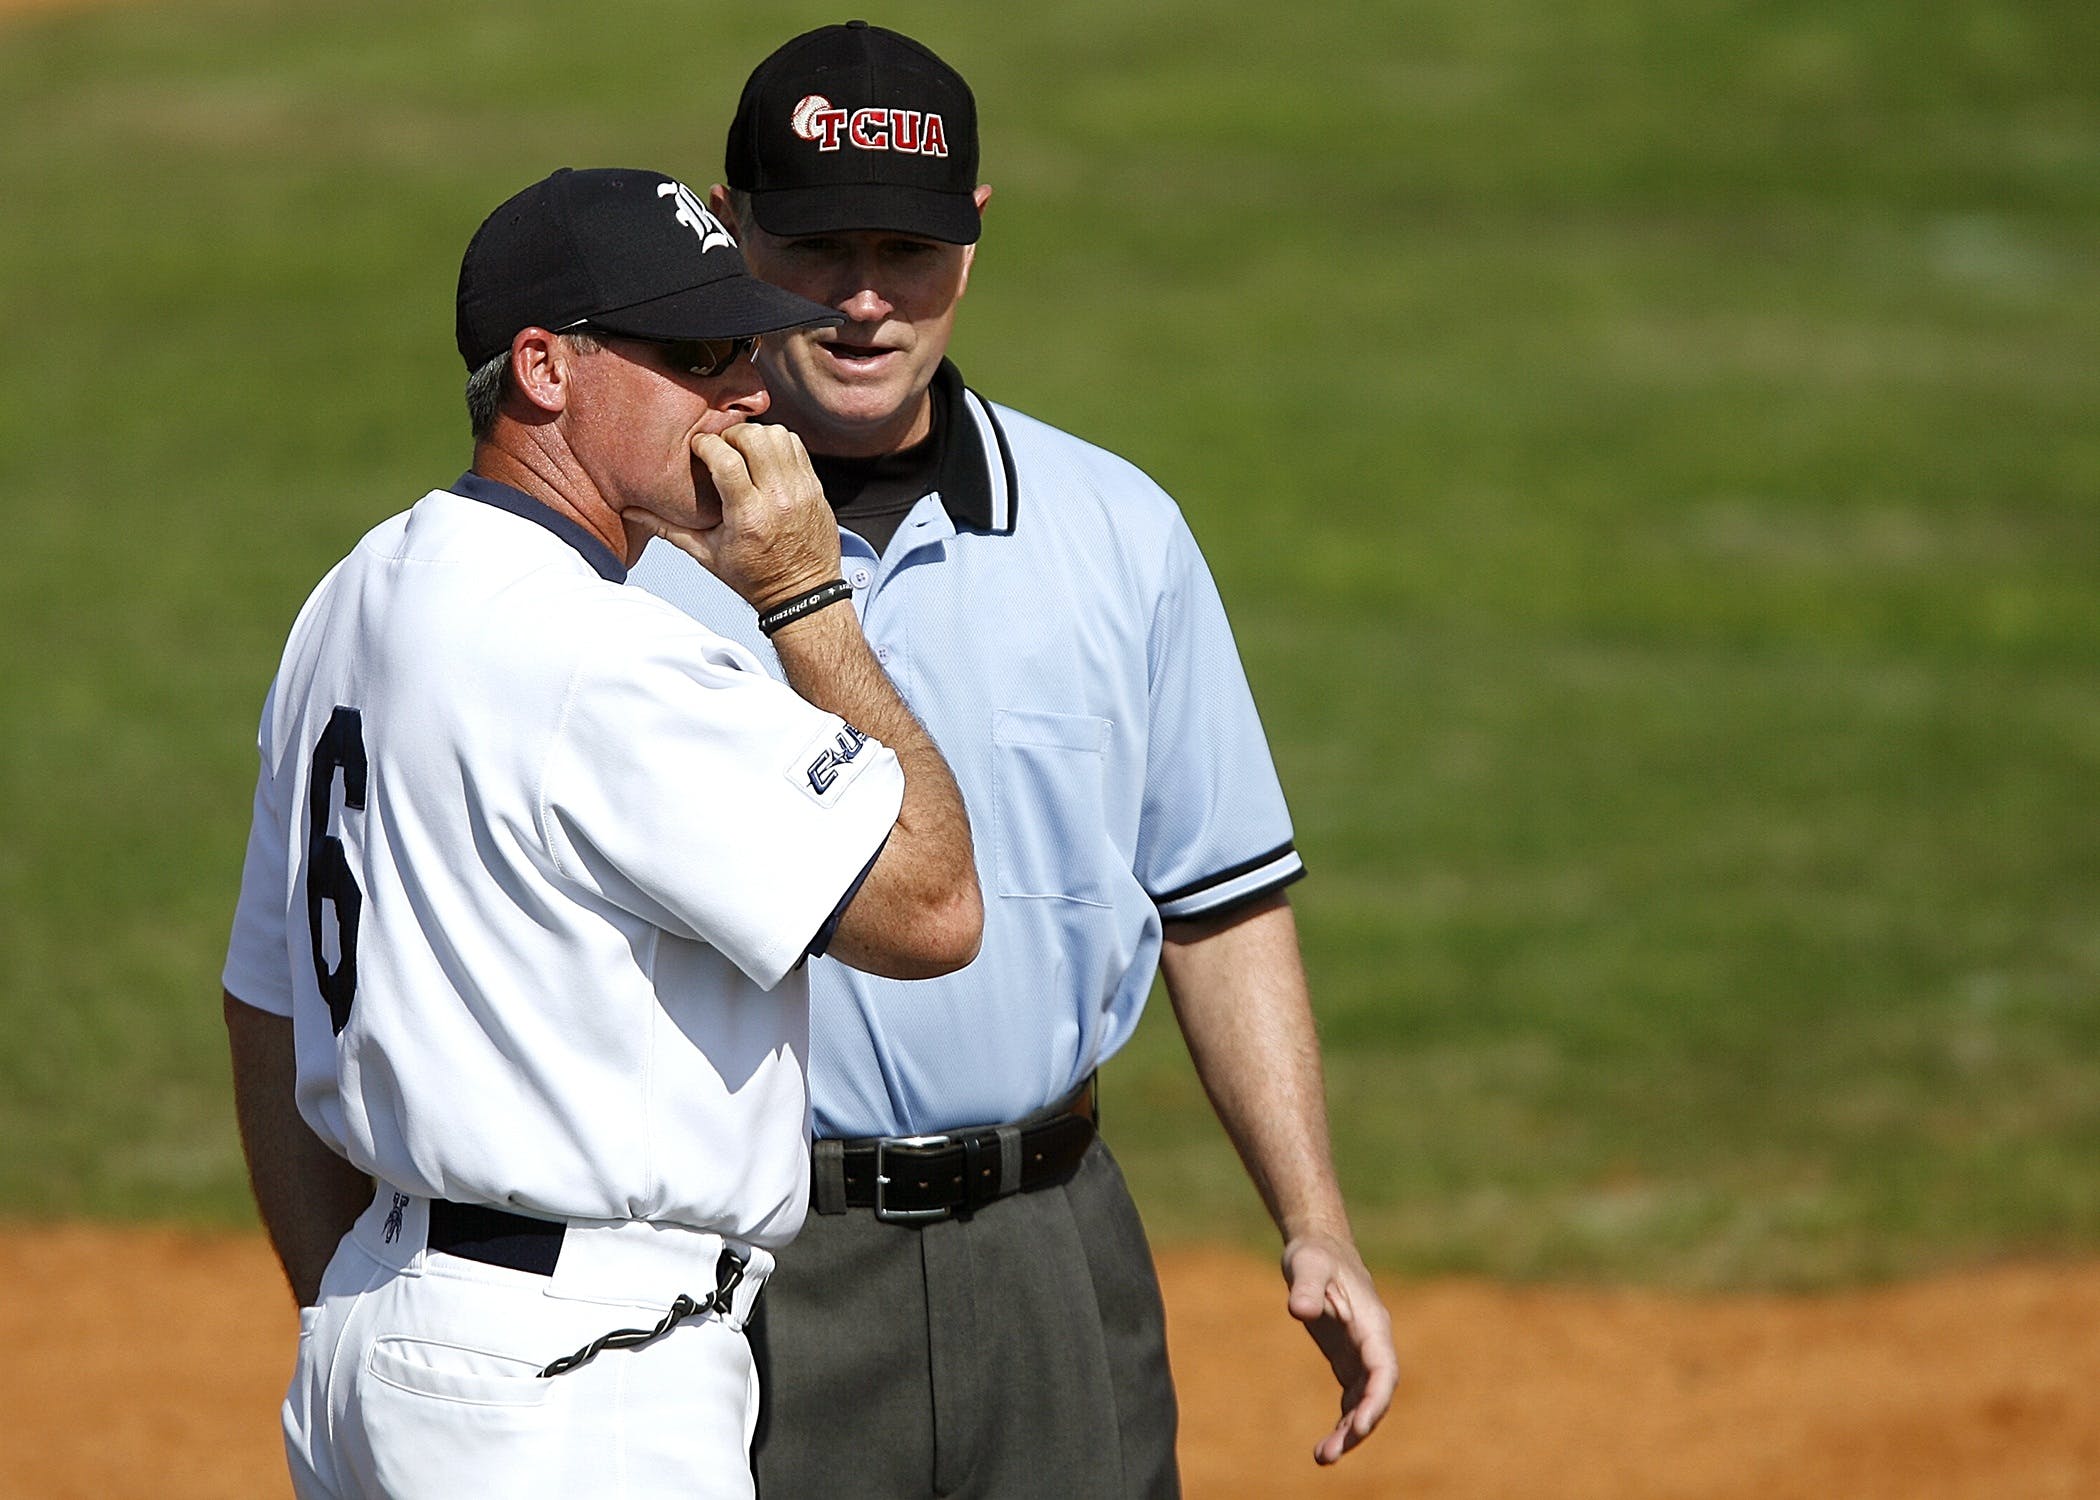 Baseball coach and umpire talking on the field